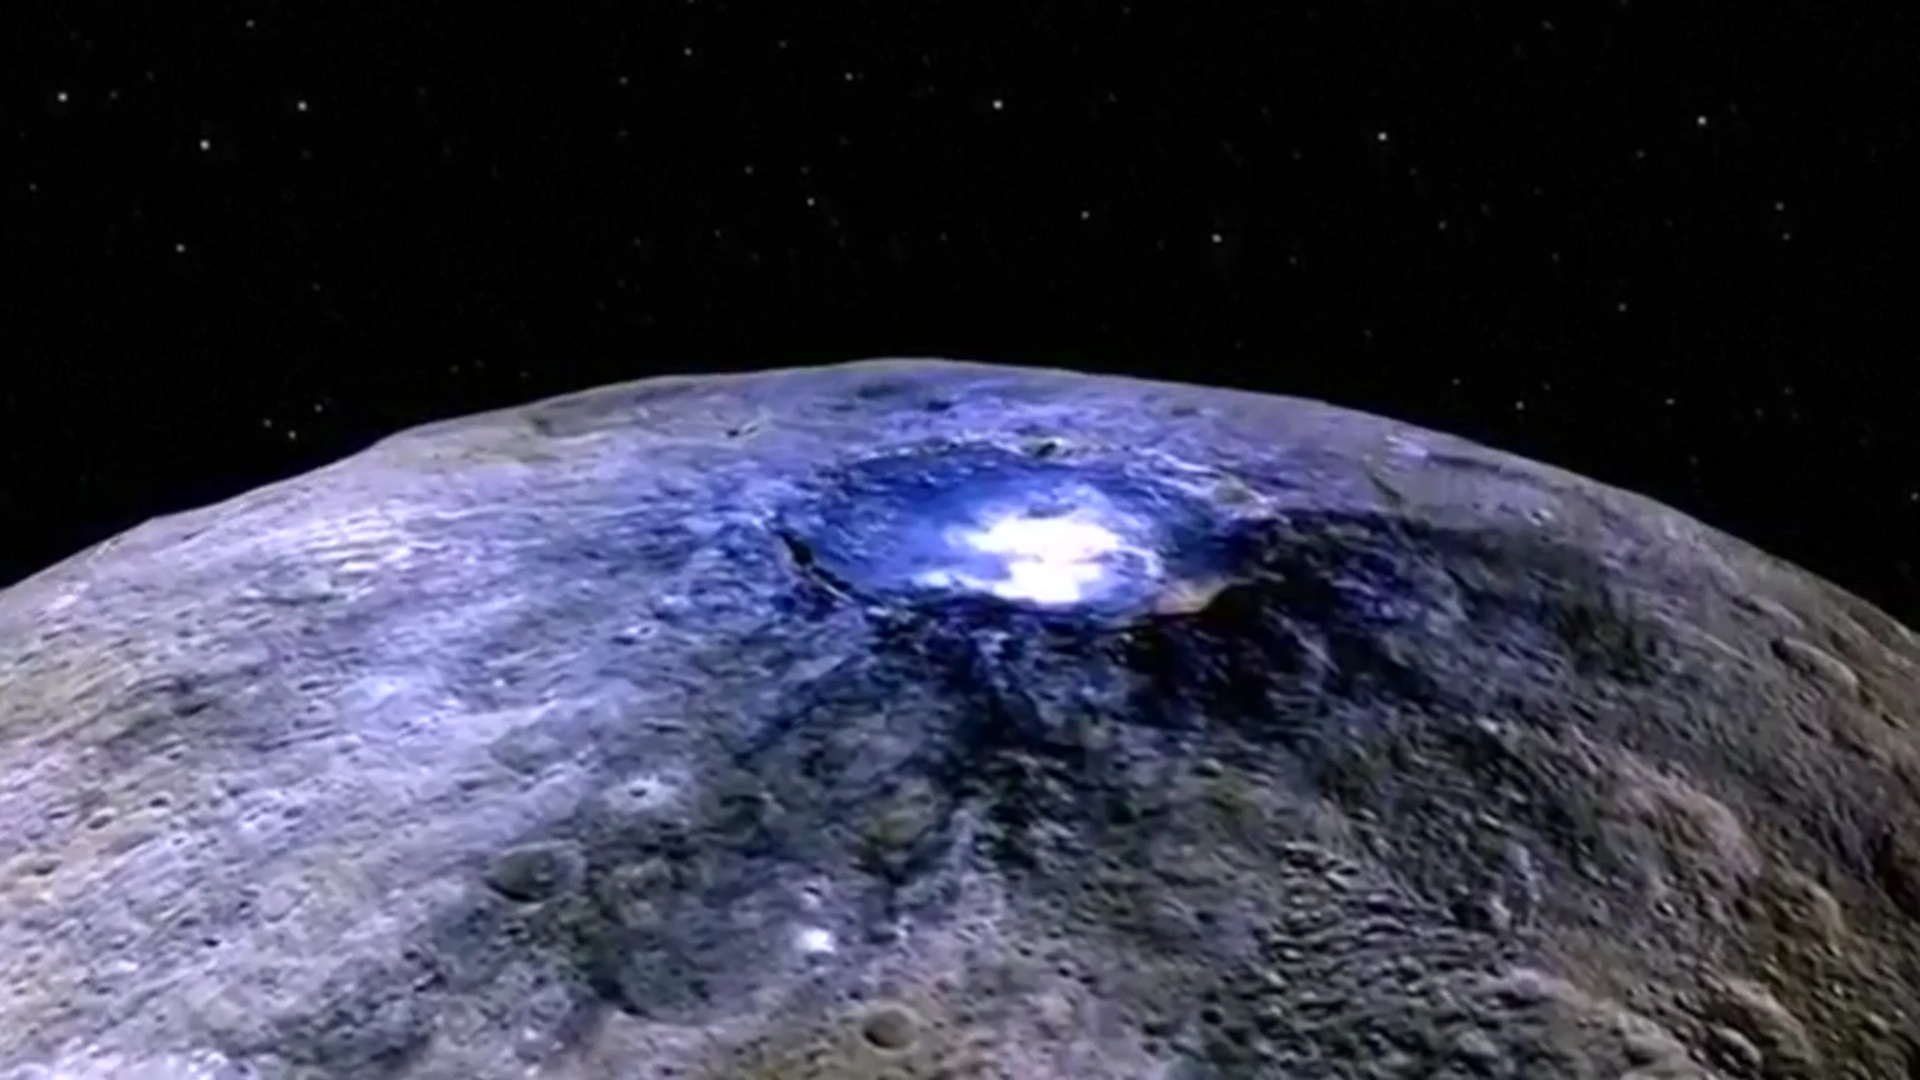 Mysterious bright spots light up Ceres's surface.